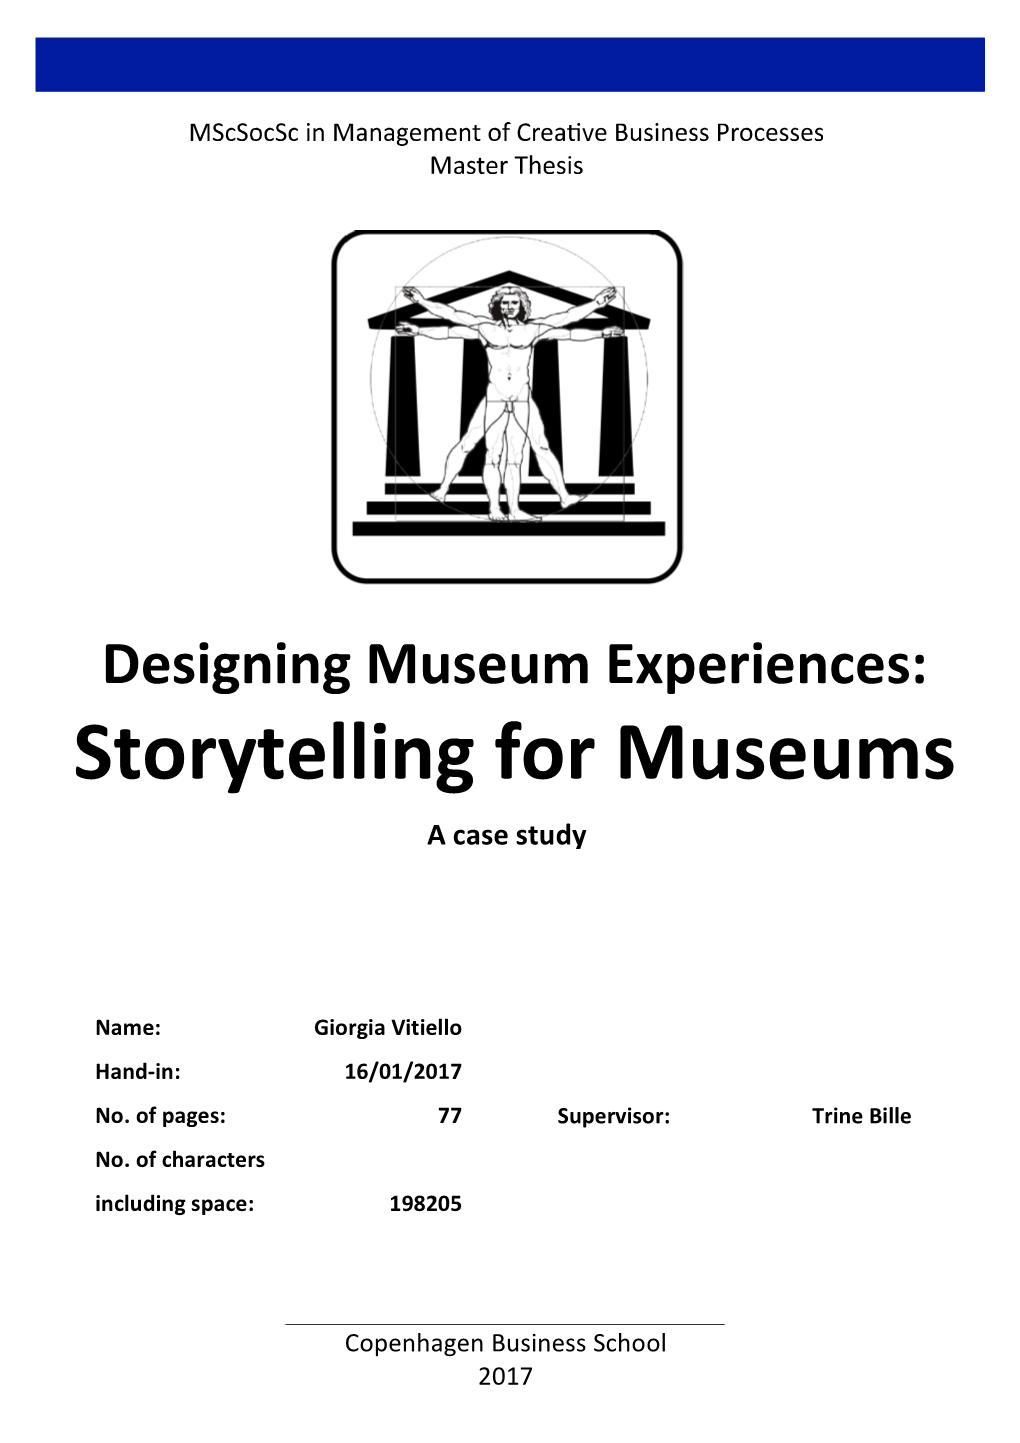 Designing Museum Experiences: Storytelling for Museums a Case Study